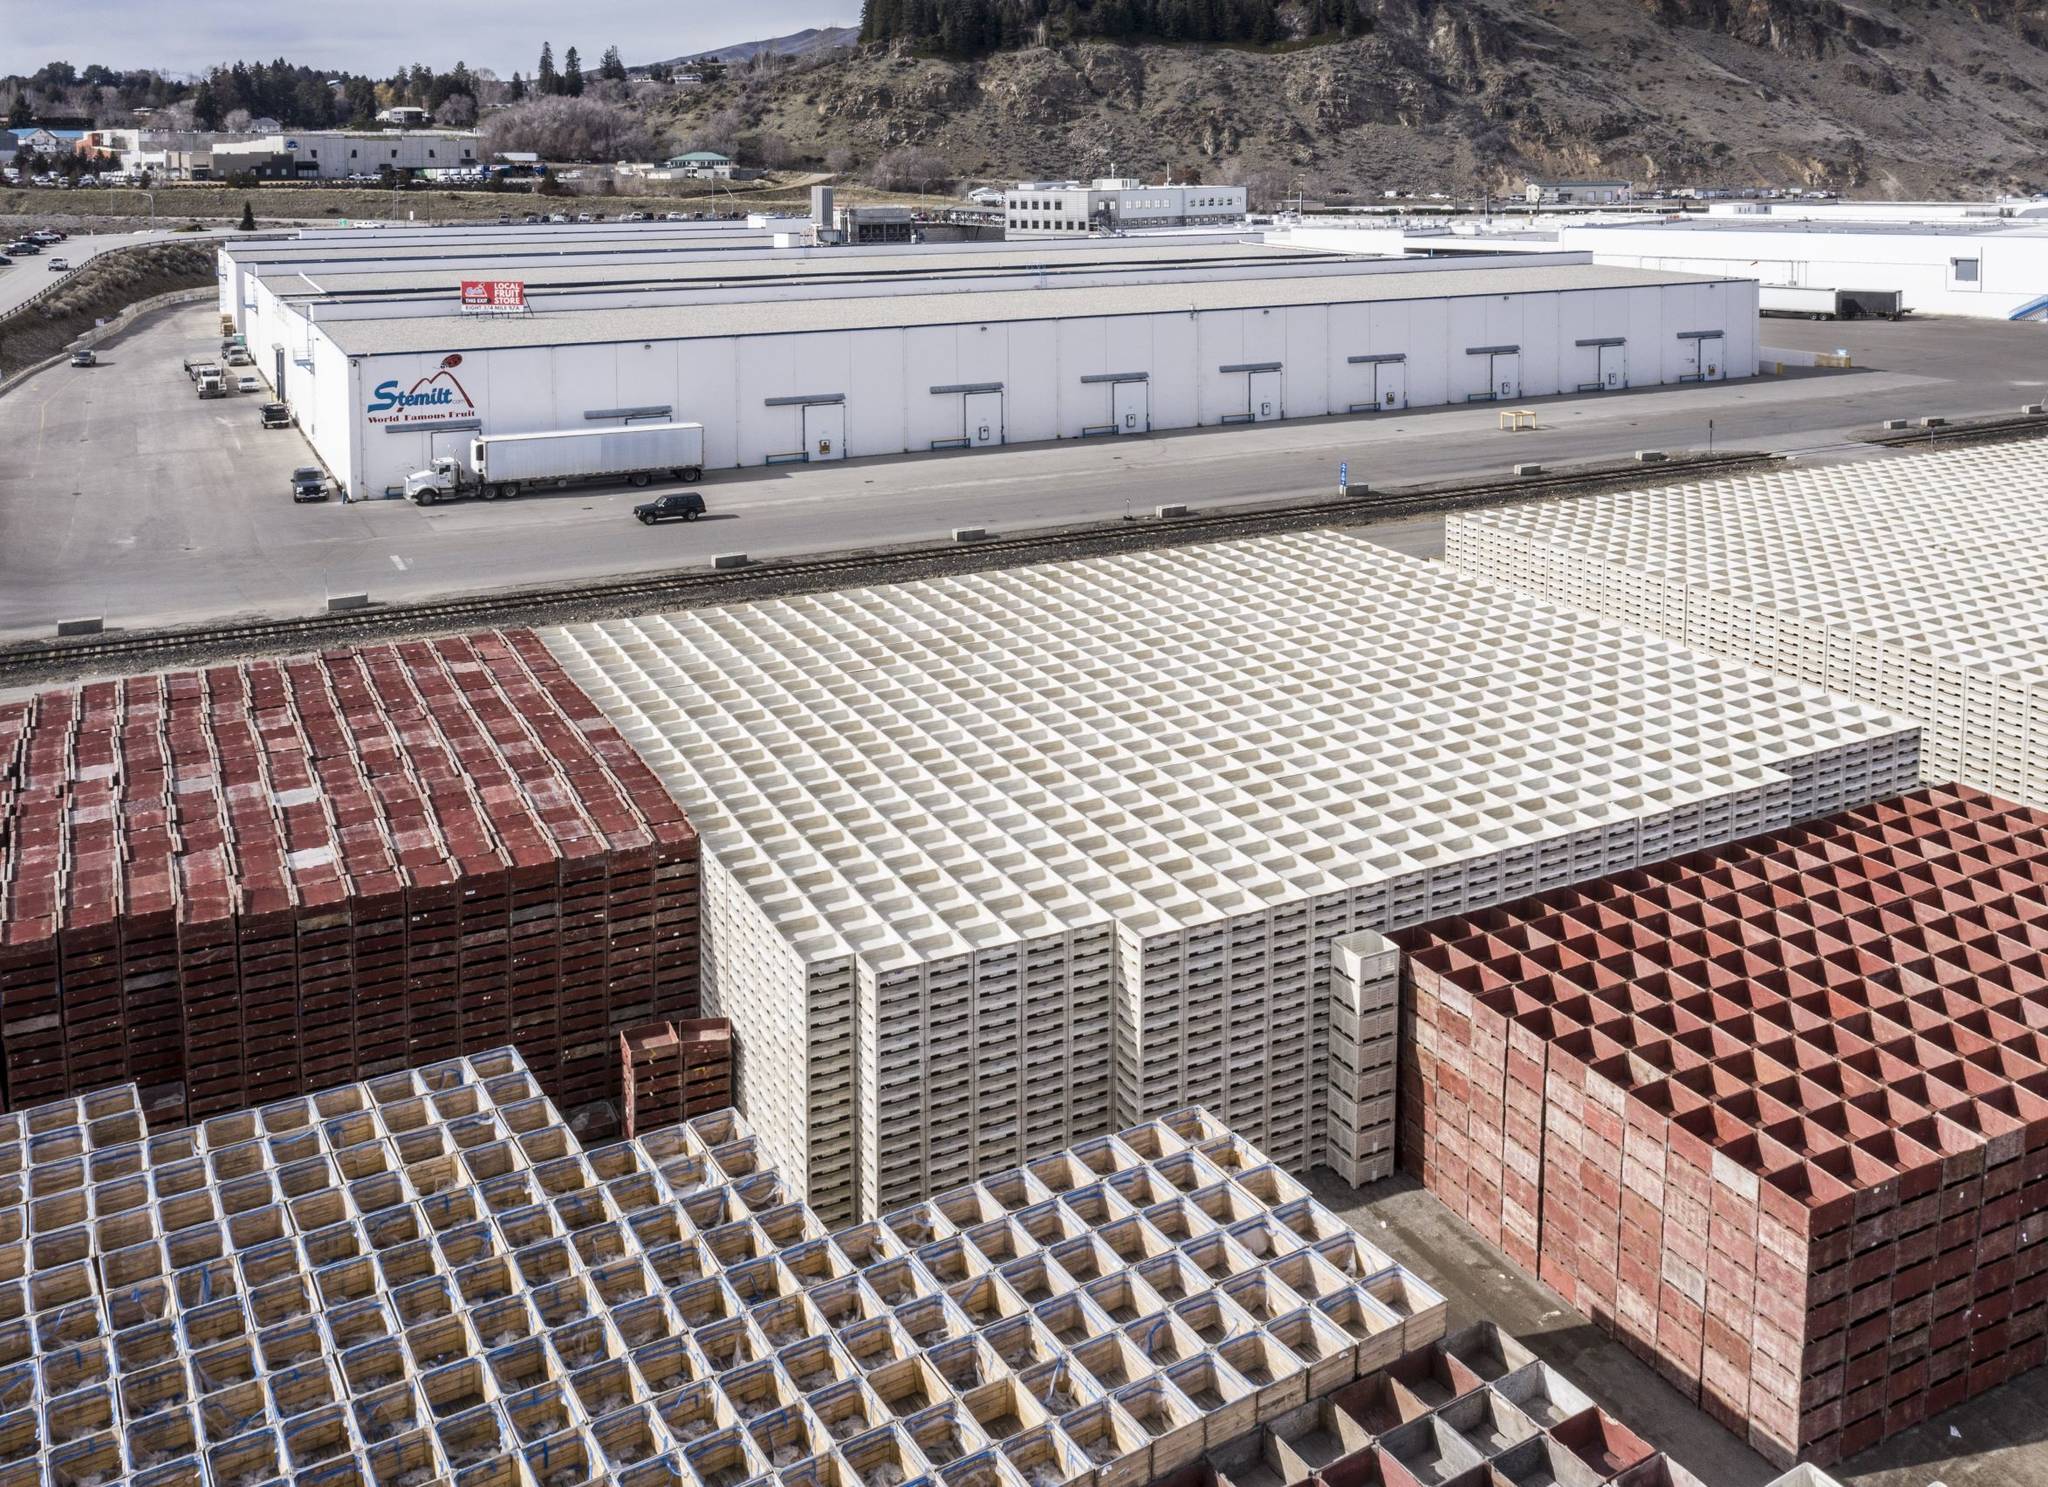 Steve Ringman/The Seattle Times
Empty fruit bins that would ordinarily be filled and exported overseas in cargo containers are waiting at Stemilt Growers’ fruit-packing plant in Wenatchee on Monday.